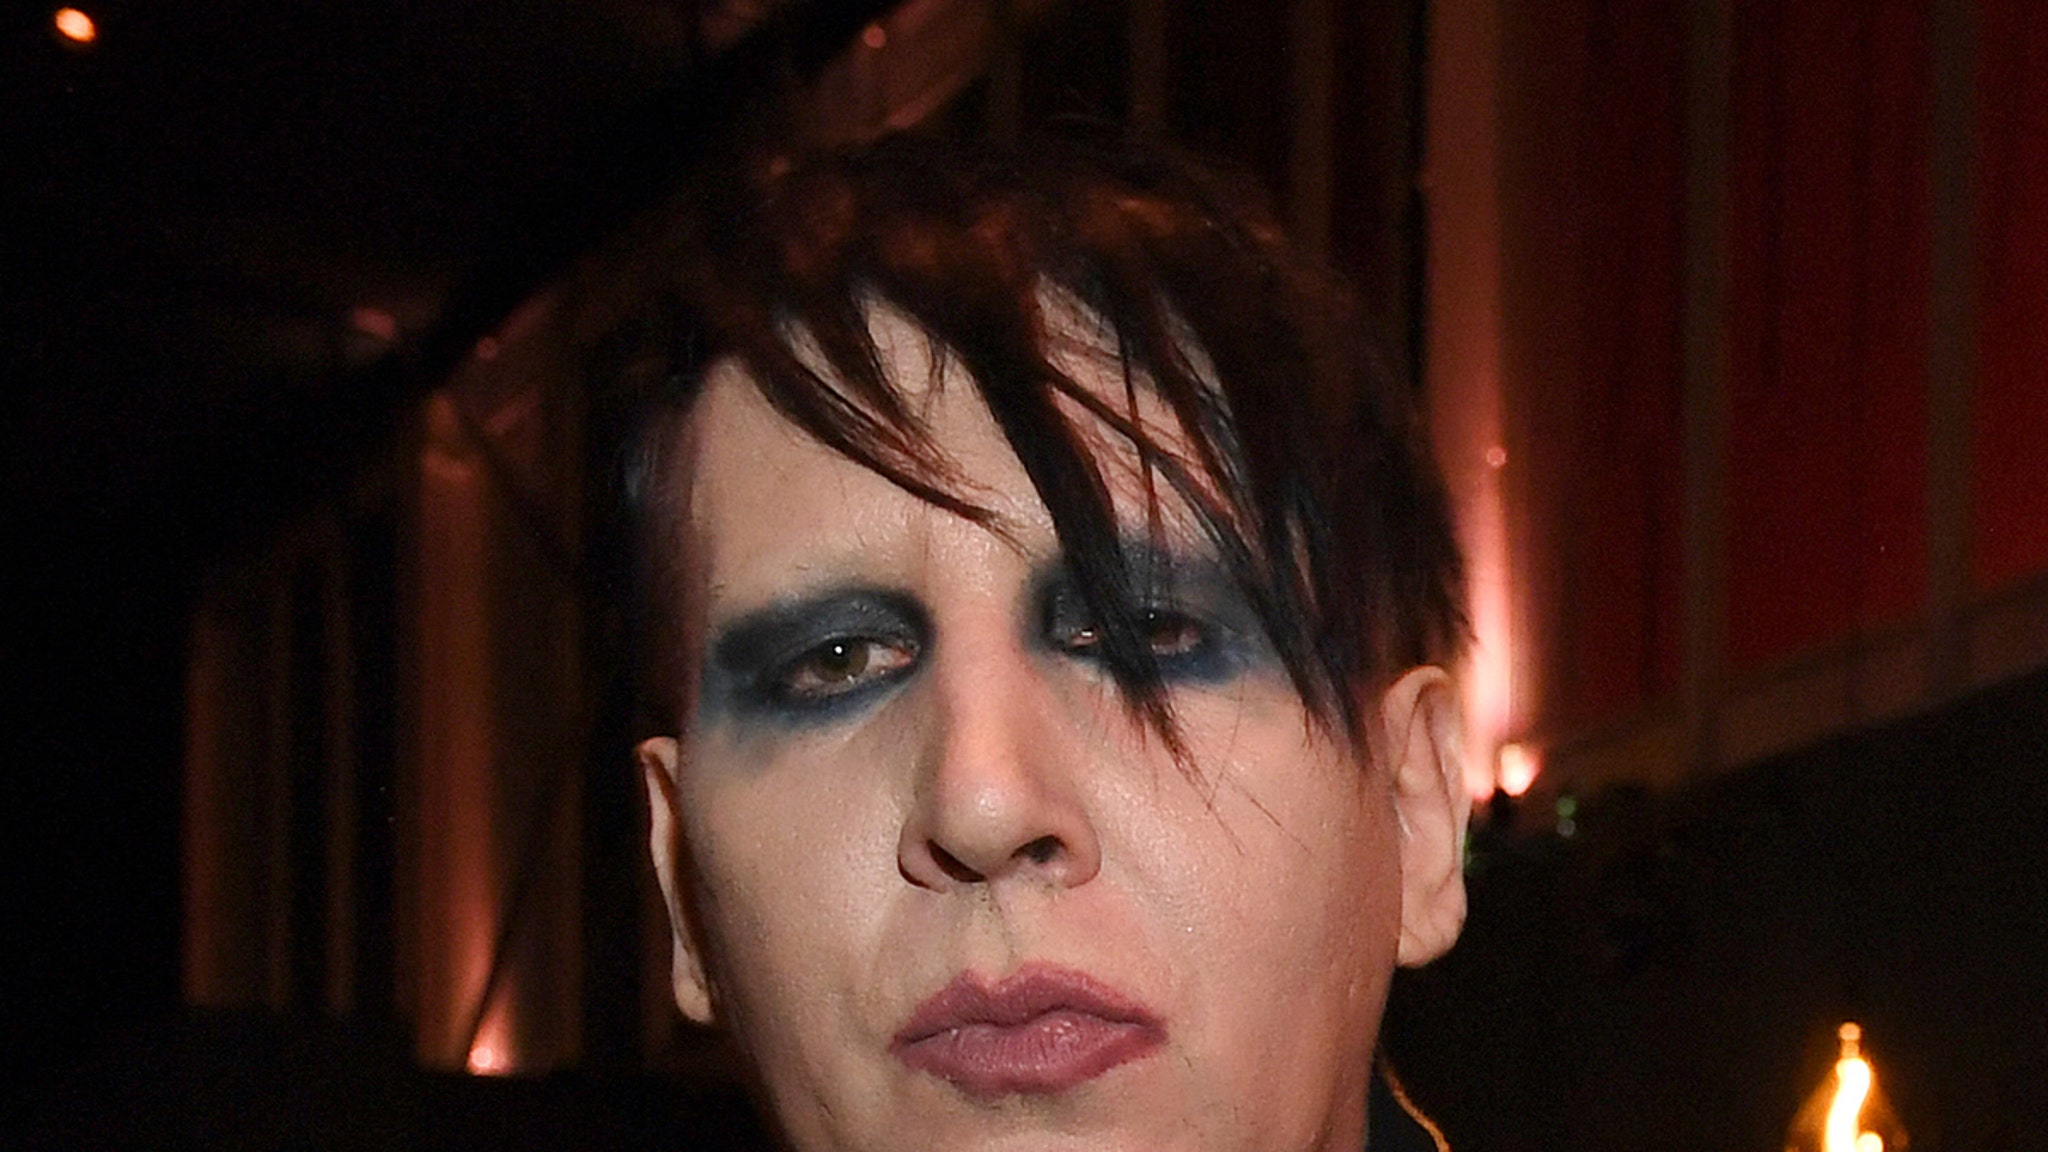 Policemen investigating allegations of abuse by Marilyn Manson